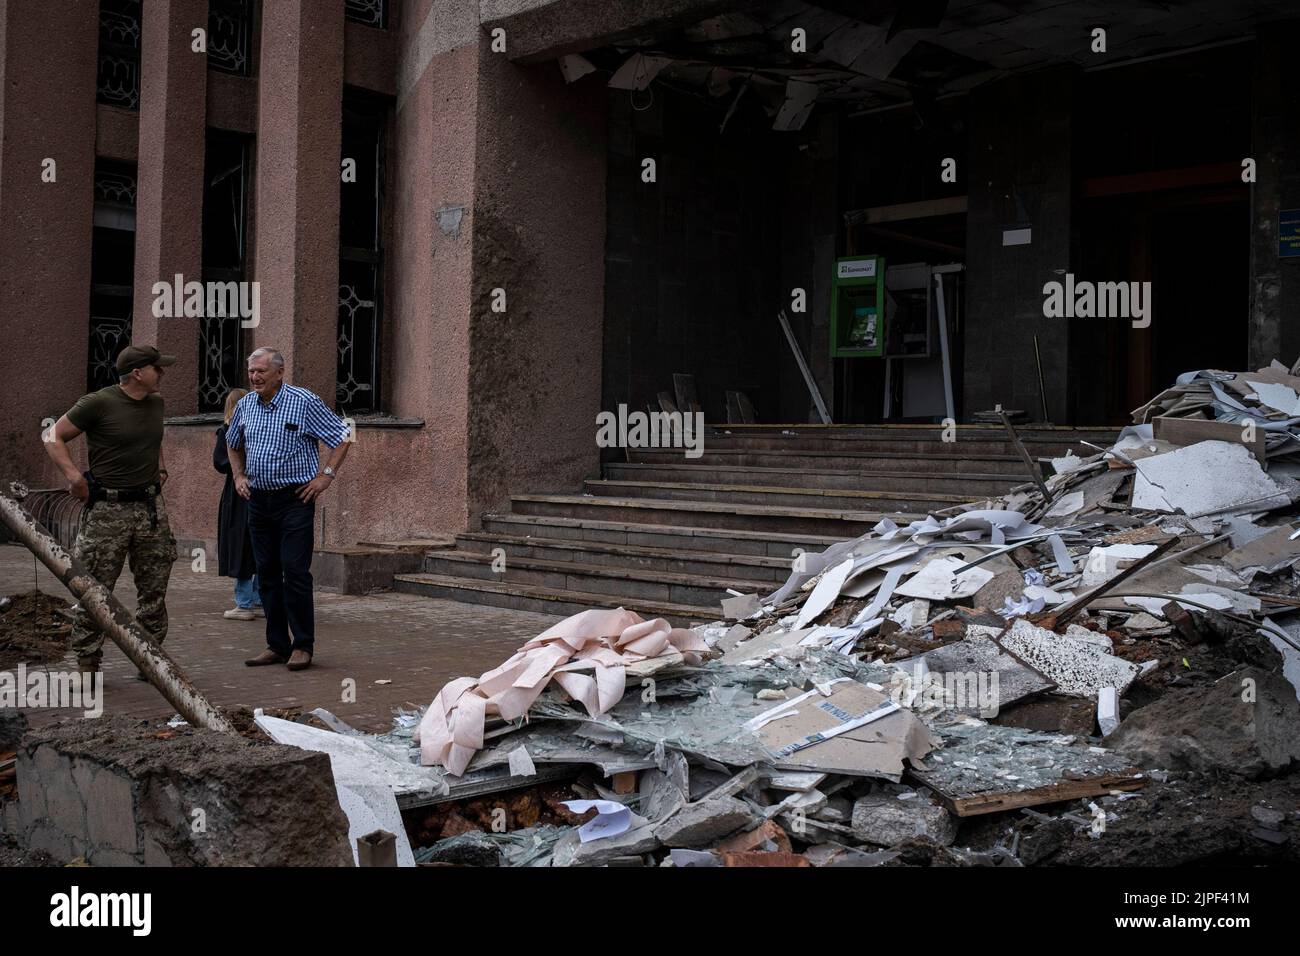 Mykolaiv Mayor Oleksandr Sienkevych and University Principal Leonid Klymenko inspect the damage by Russian artillery strikes at Petro Mohyla Black Sea National University in Mykolaiv. The university was struck by several Russian shelling at around 1:30 on August 16, as the mayor Oleksandr Sienkevych claimed no one was injured in the shelling. Russia's Ministry of Defense said earlier on social media that the university was a military strategic target with storage of heavy weapons. Stock Photo